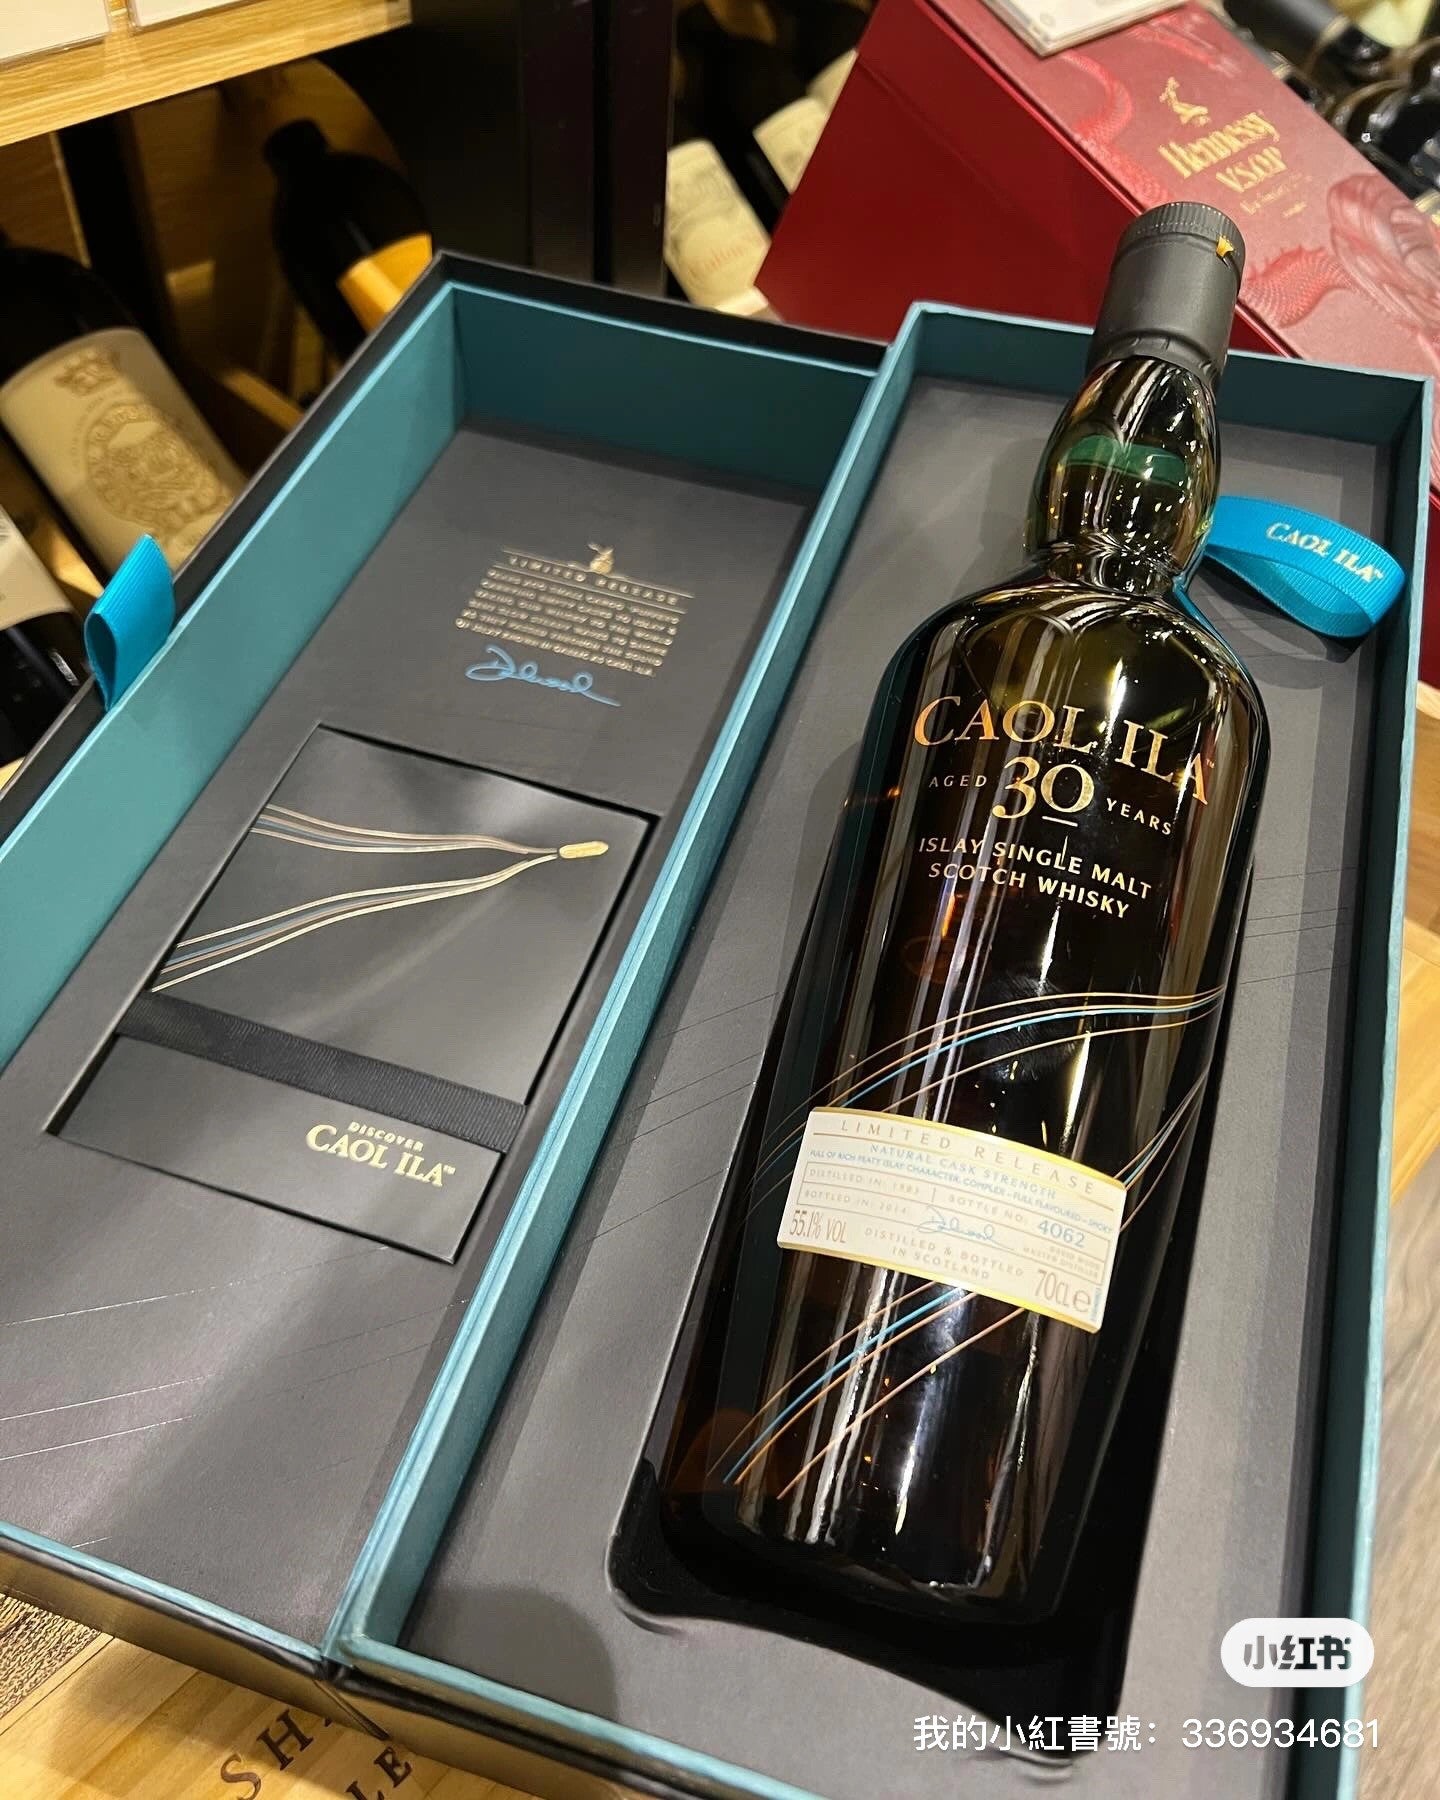 Caol ila 30 Years Limited Release